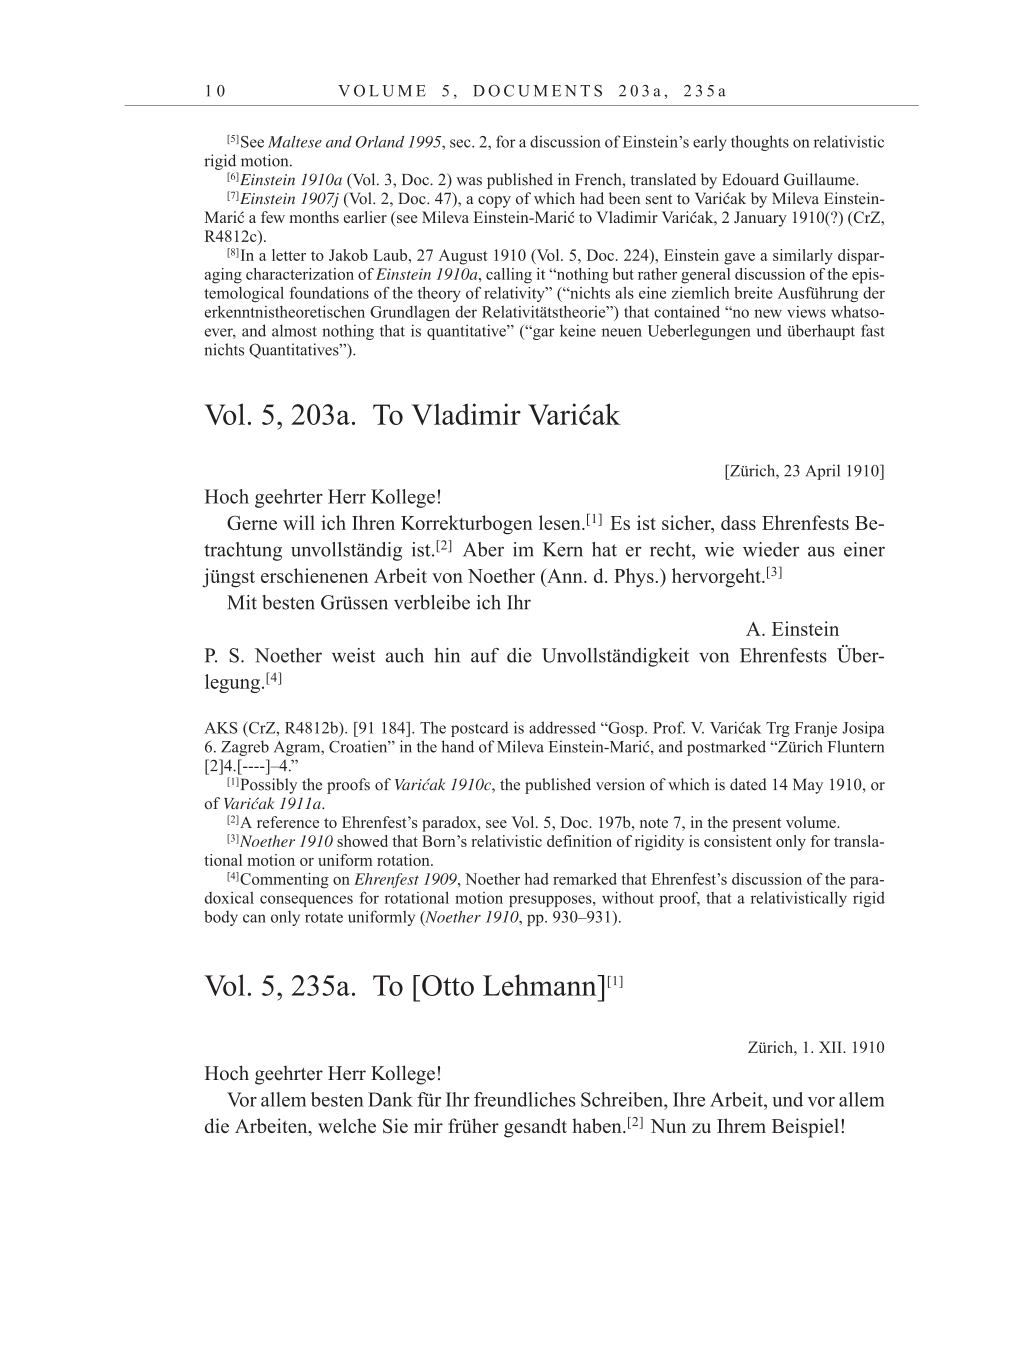 Volume 10: The Berlin Years: Correspondence May-December 1920 / Supplementary Correspondence 1909-1920 page 10